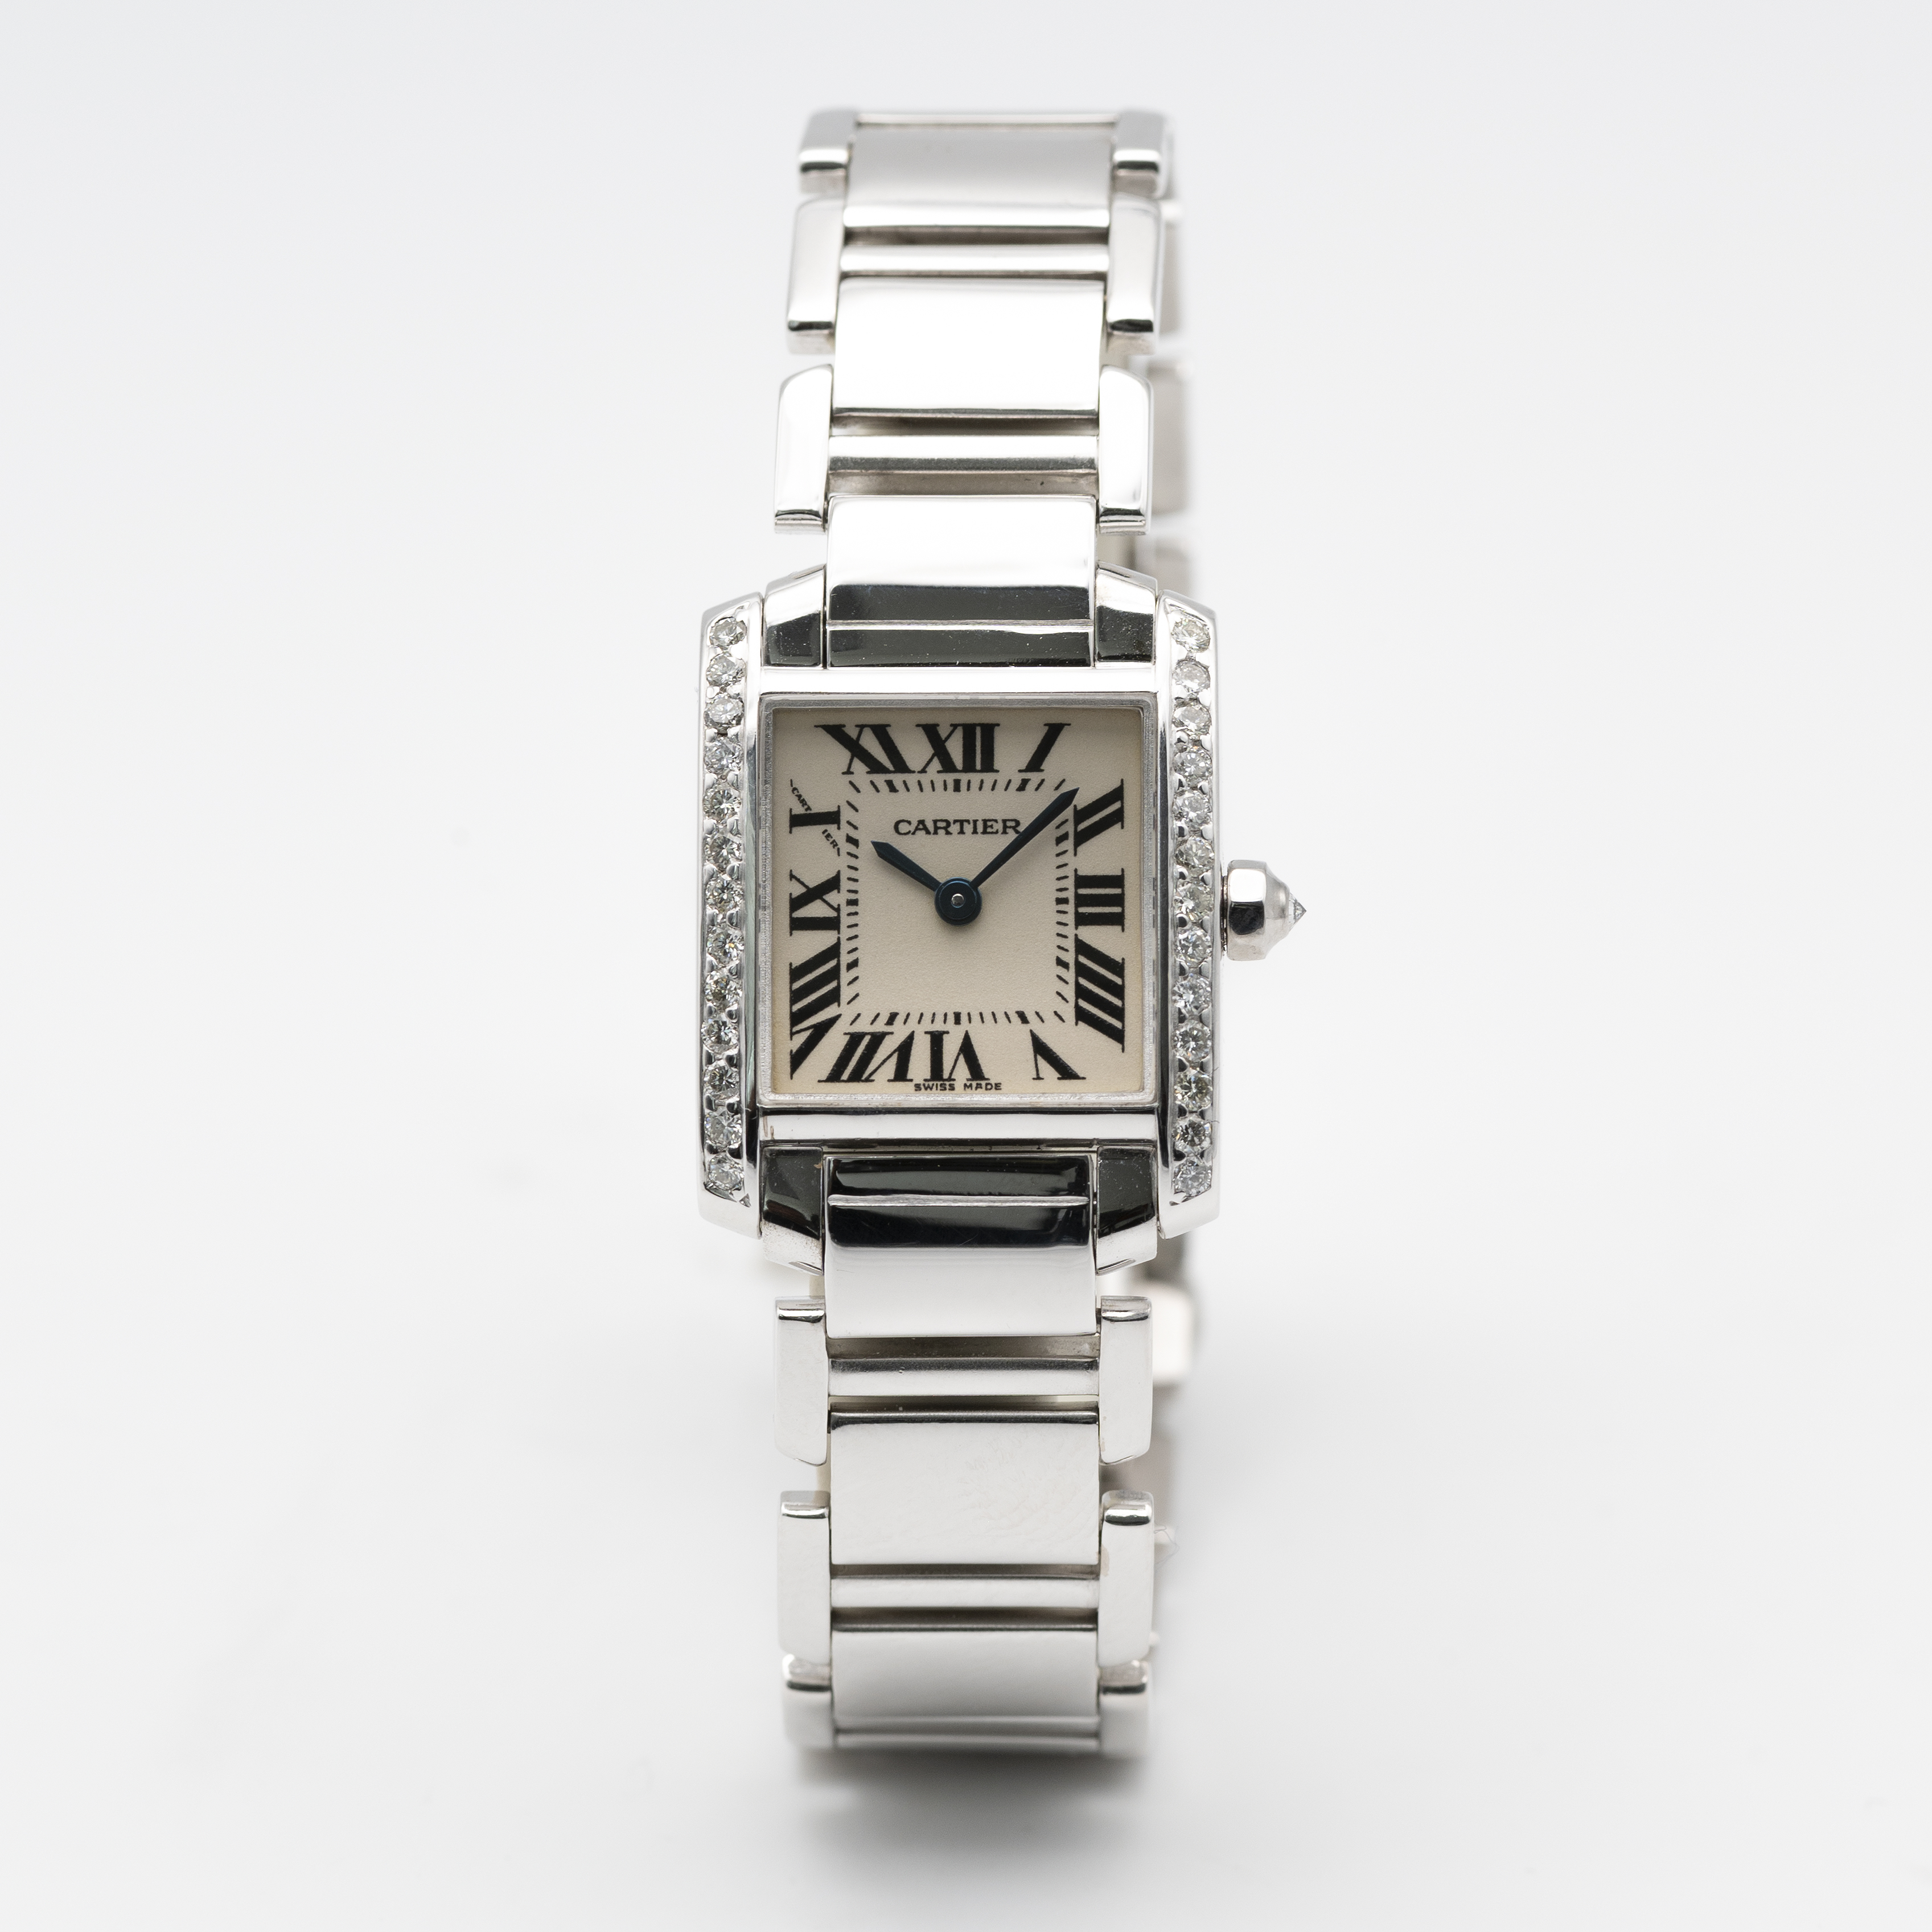 A LADIES 18K SOLID WHITE GOLD CARTIER TANK FRANCAISE BRACELET WATCH CIRCA 2005, REF. 2403 WITH AFTER - Image 2 of 9